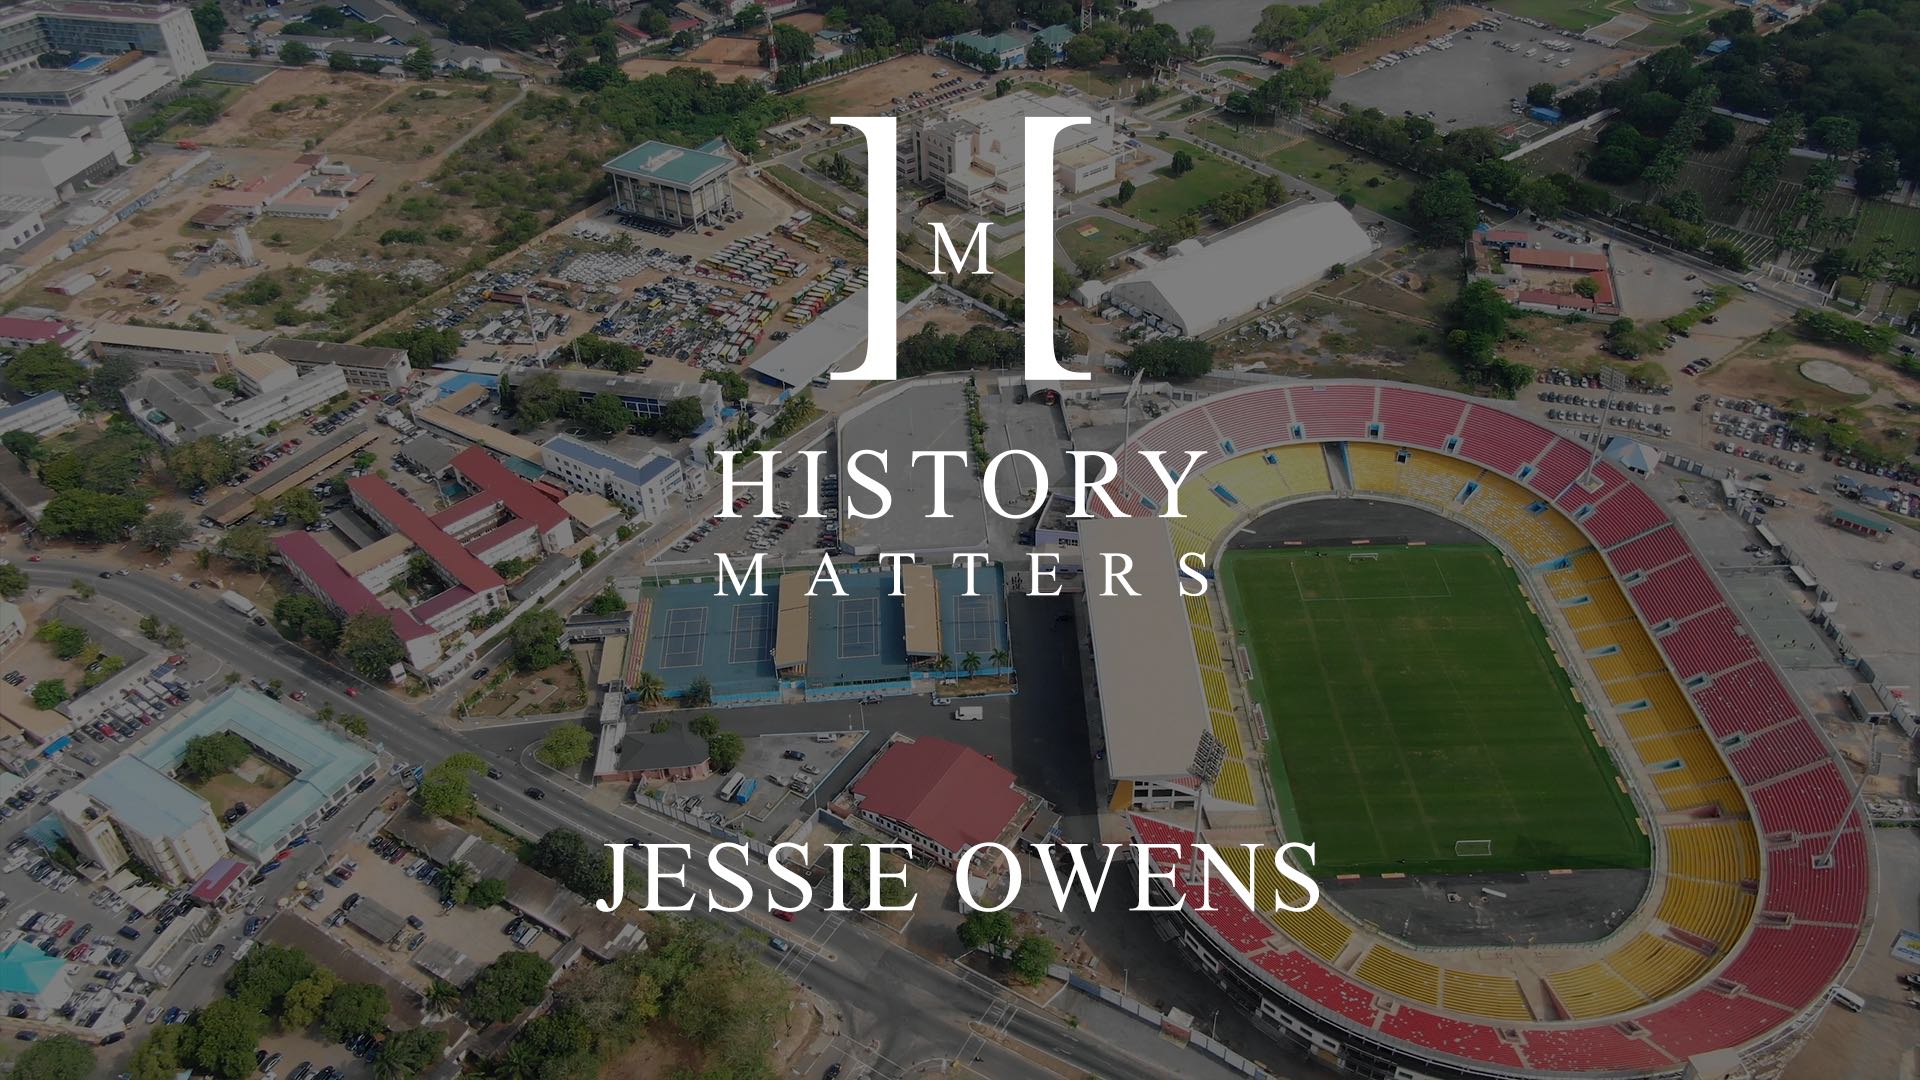 IU C&I Studios Page White History Matters Jessie Owens logo with dimmed background aerial view of buildings, tennis courts and stadium